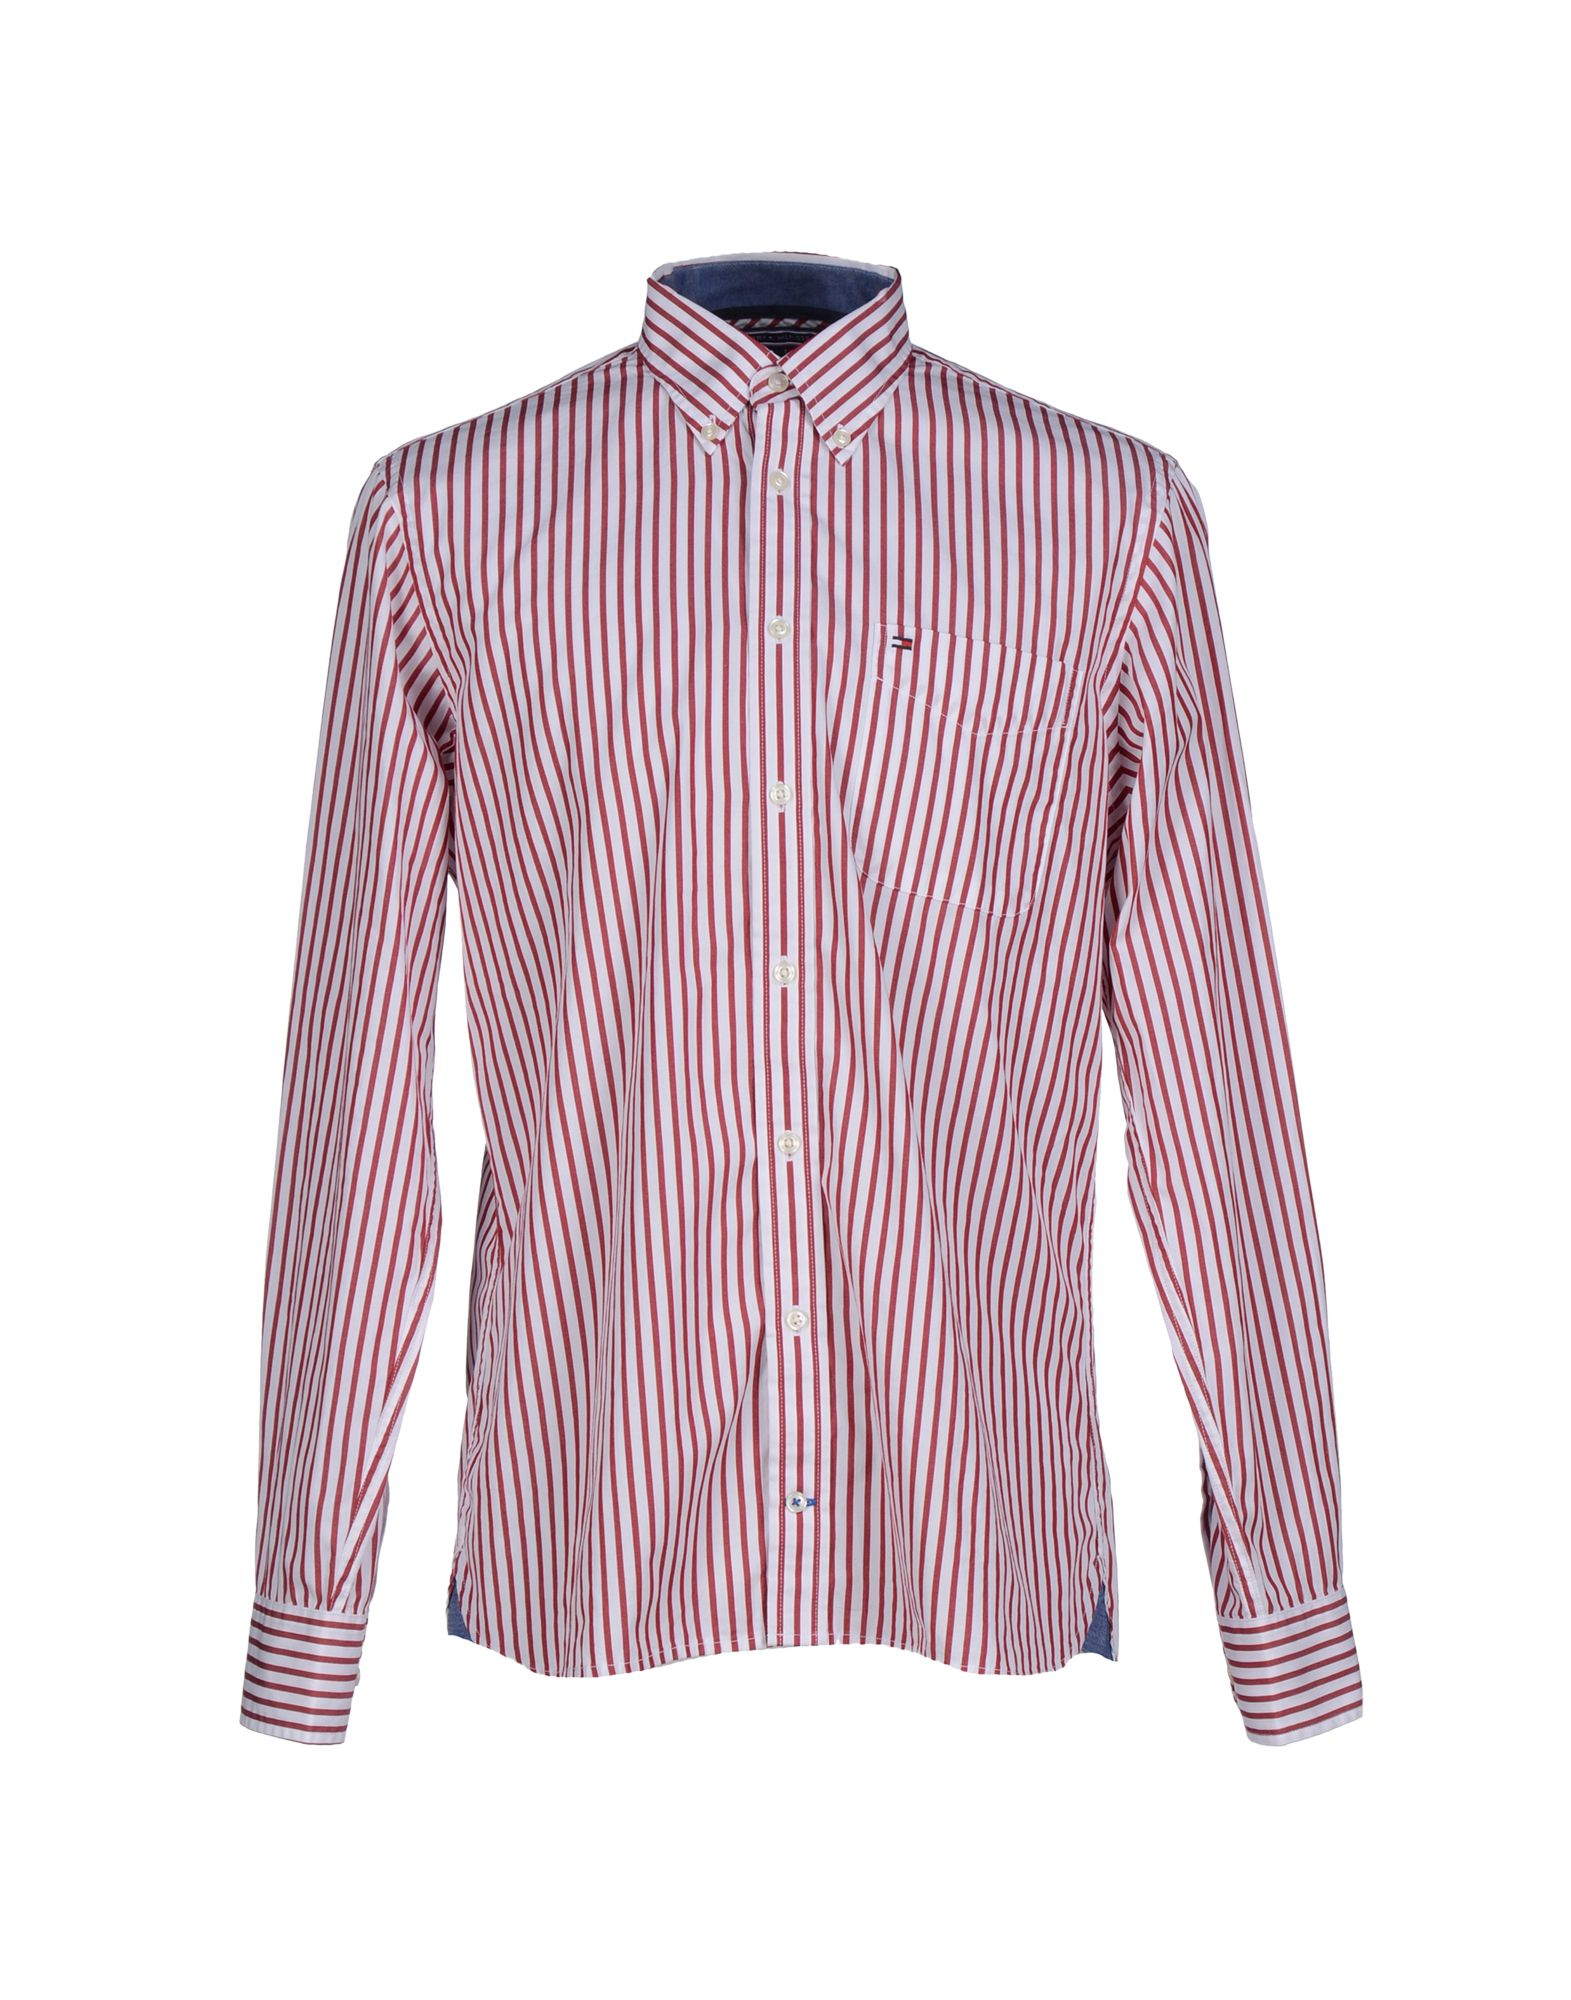 Lyst - Tommy Hilfiger Shirt in Red for Men